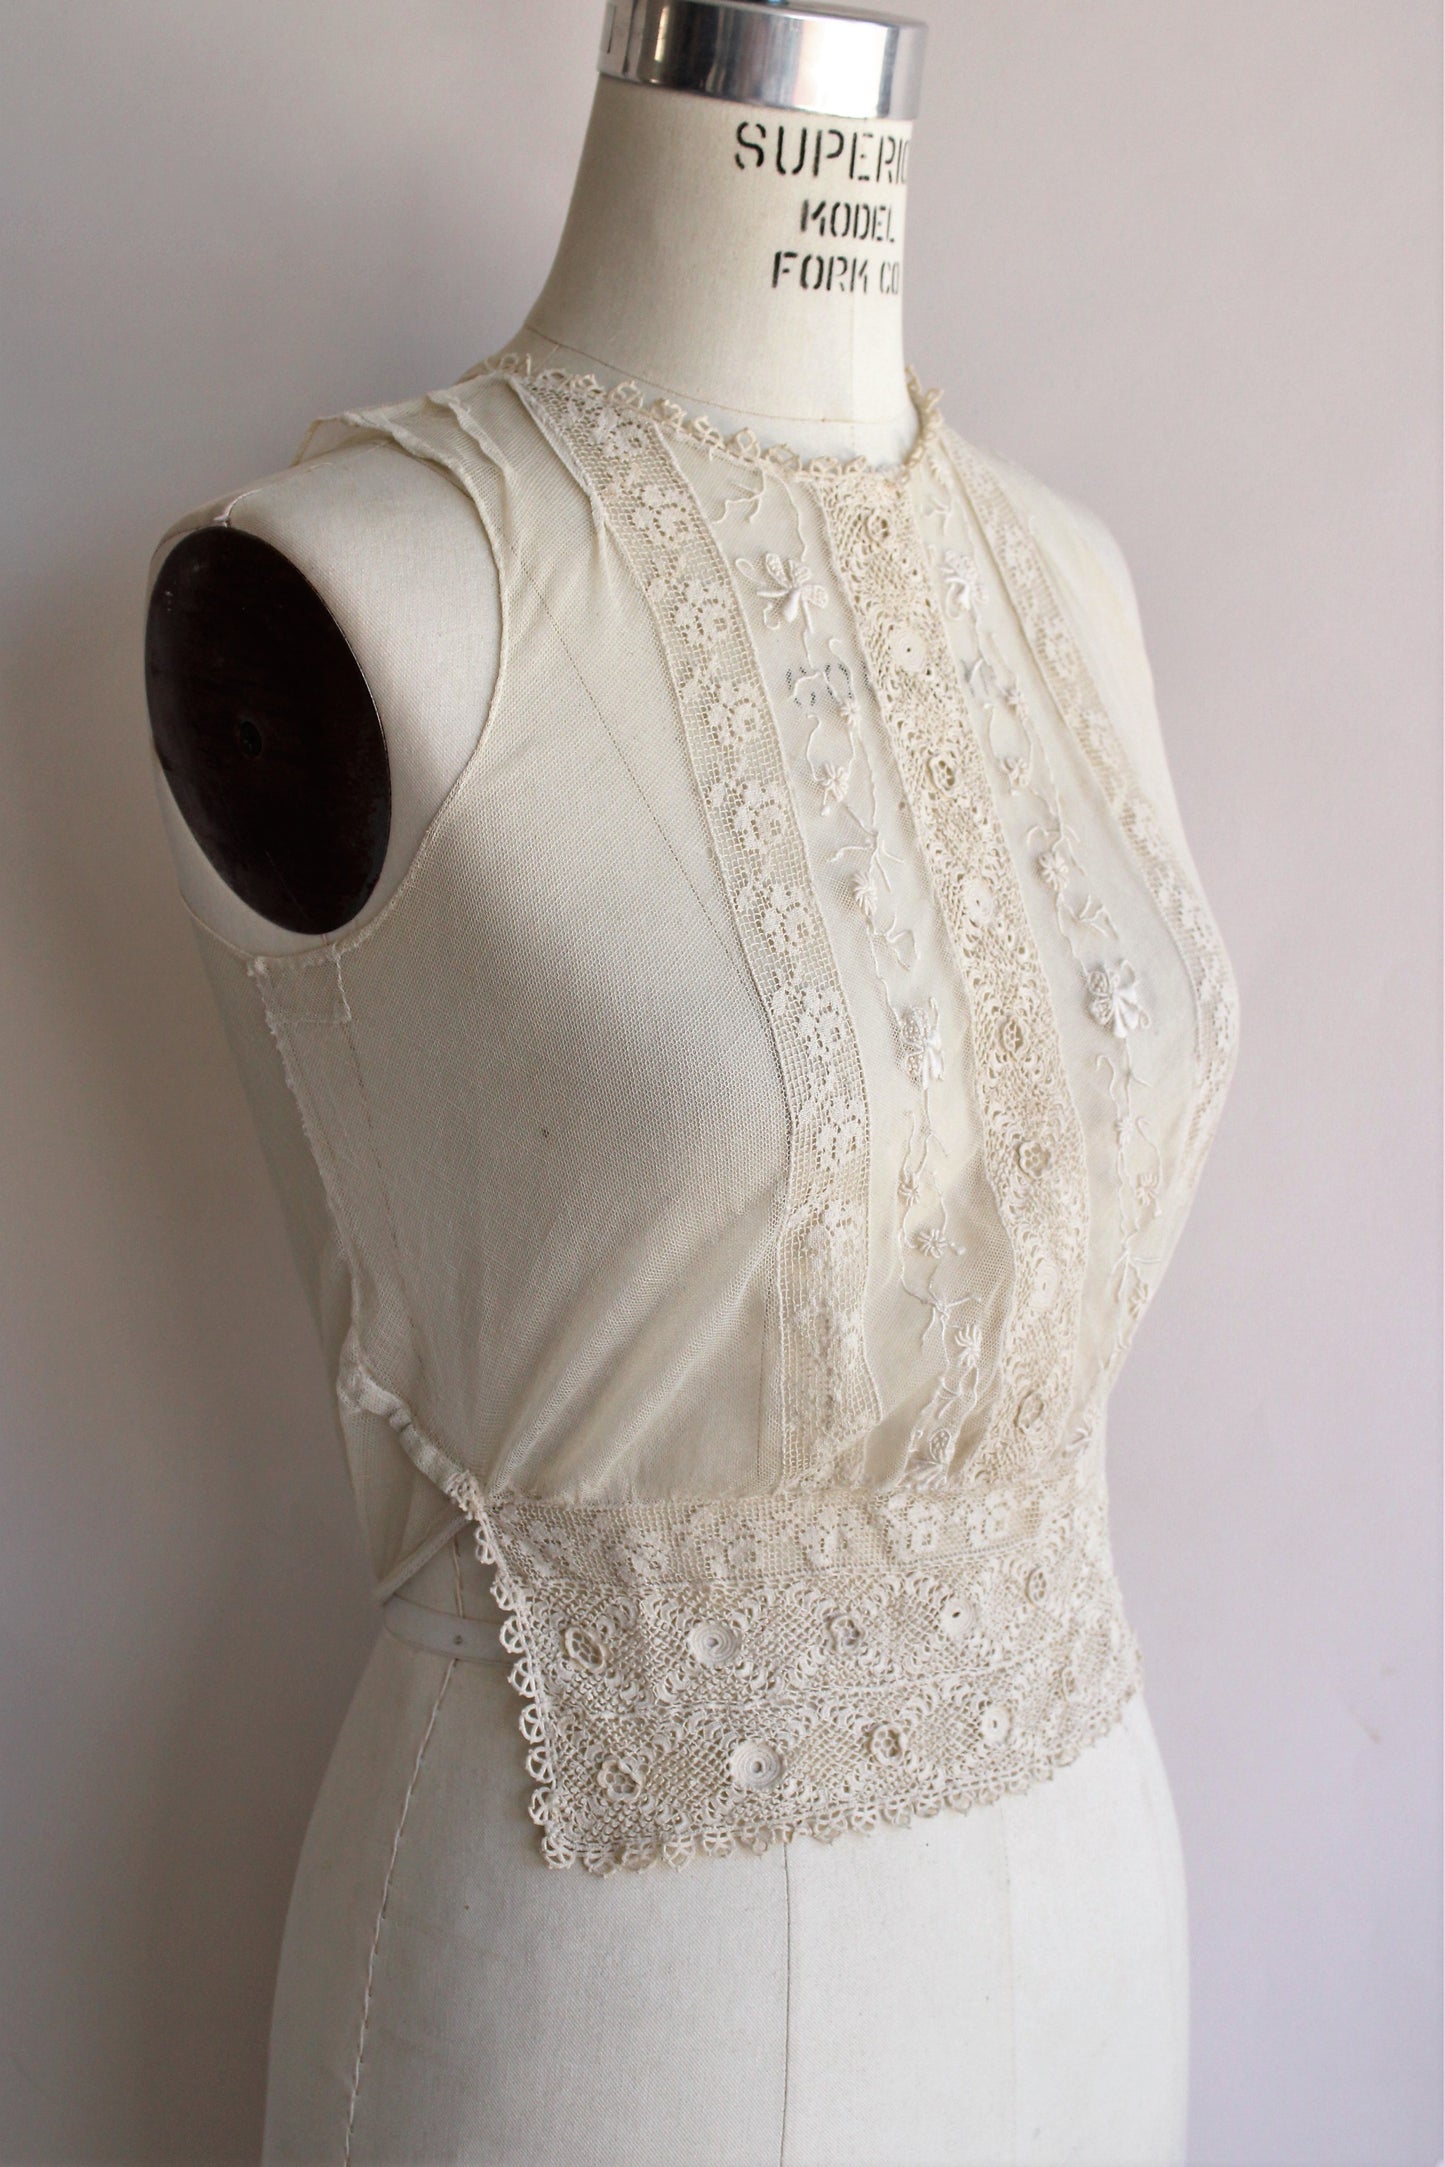 Vintage 1910s Sheer Mesh and Lace Blouse